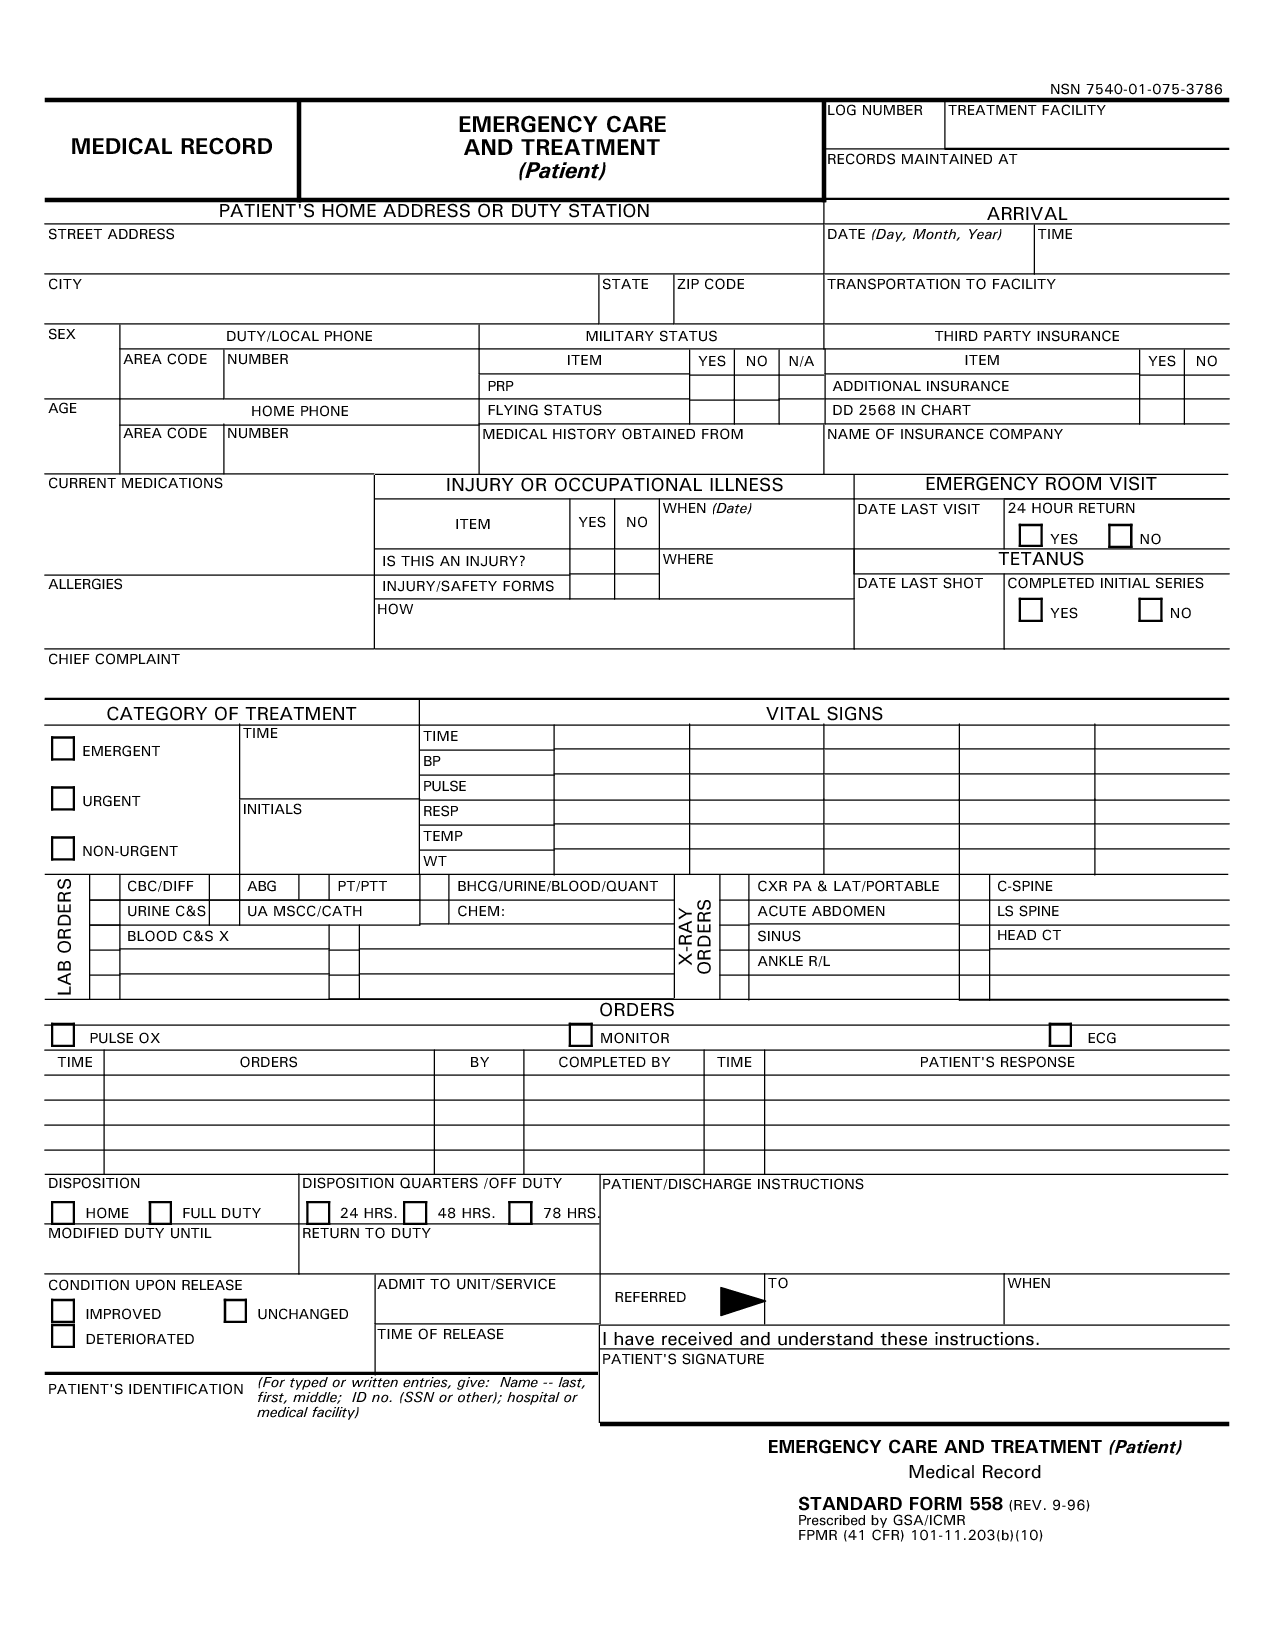 medical record template   East.keywesthideaways.co